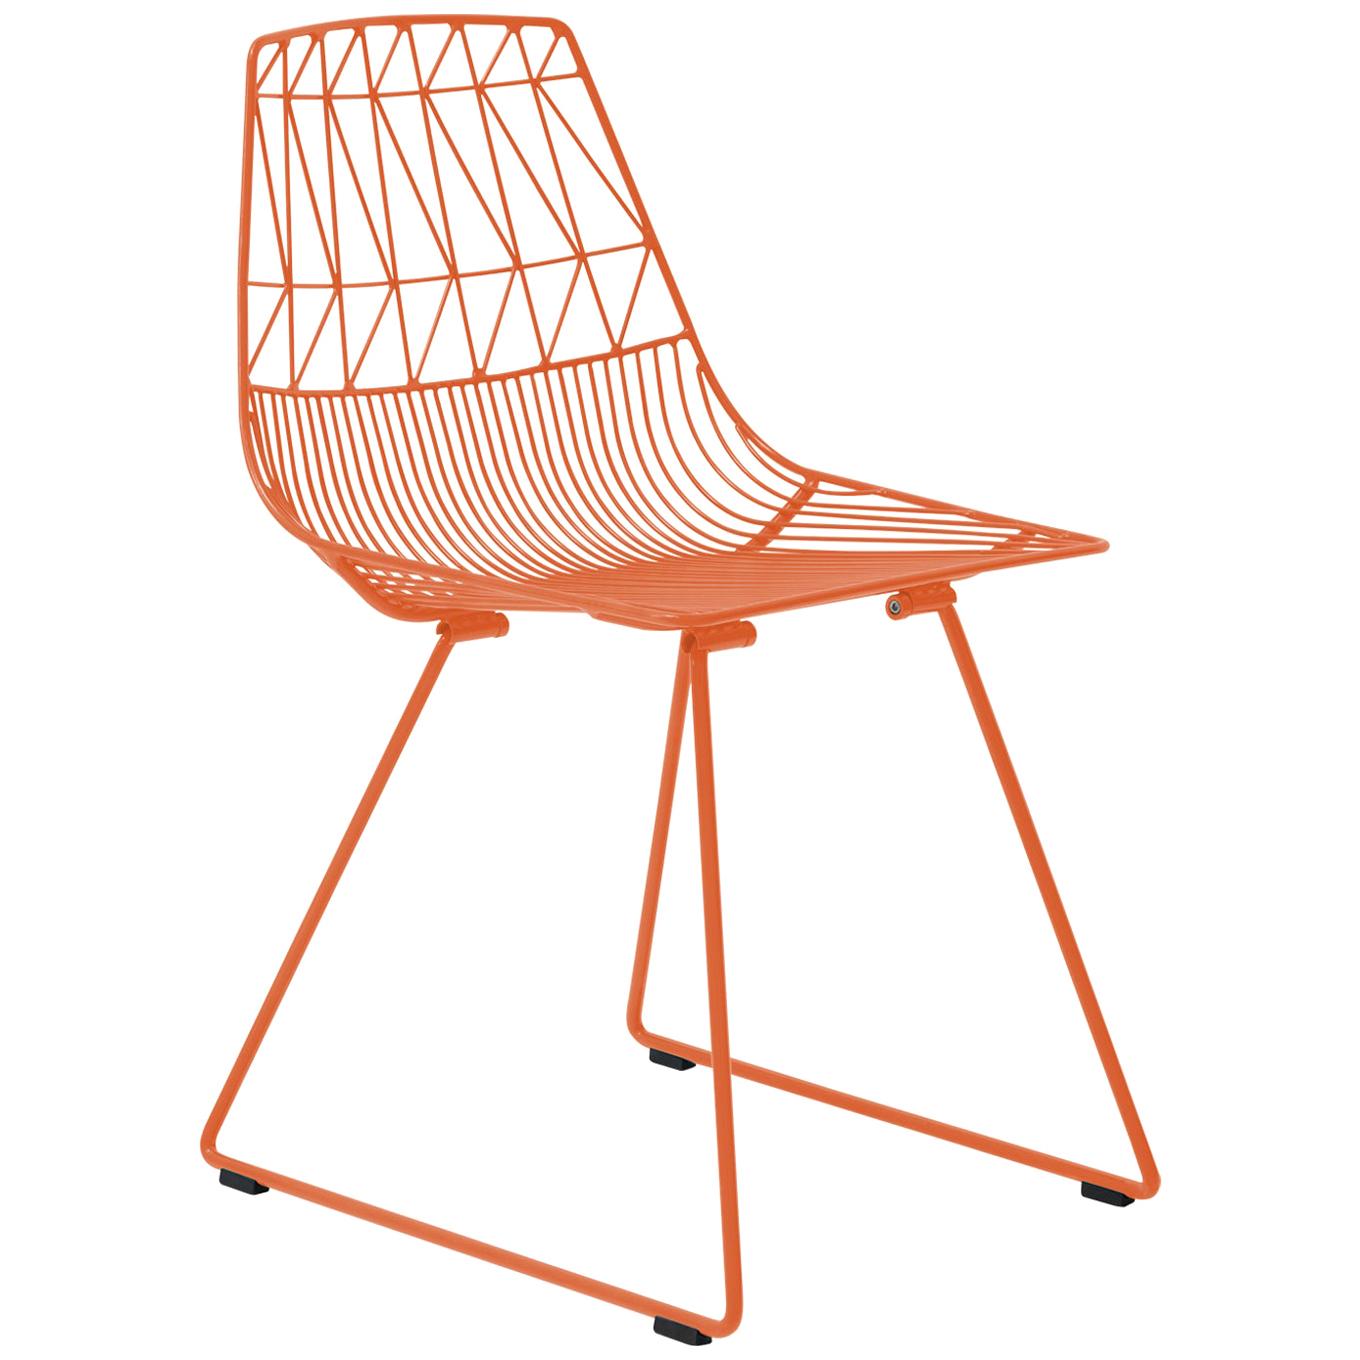 Bend Goods Side Chairs